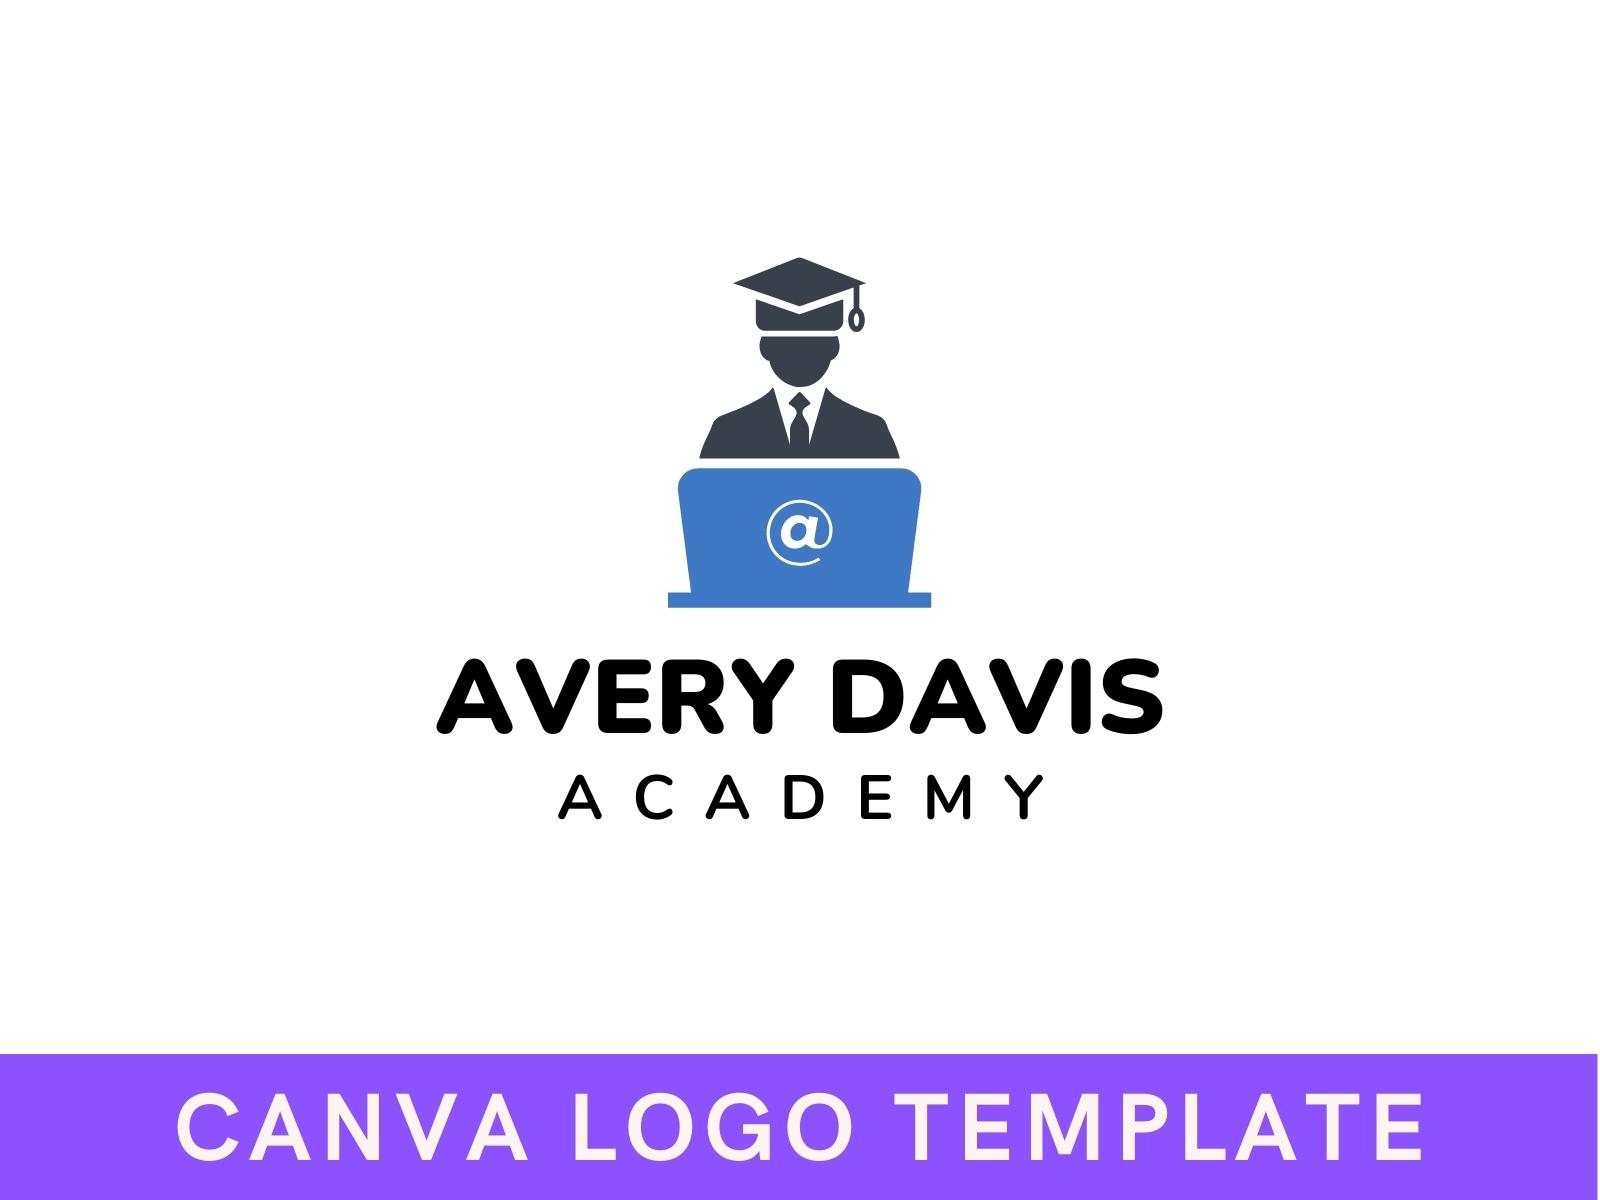 Stylish logo needed for live & learn classes | Logo design contest |  99designs